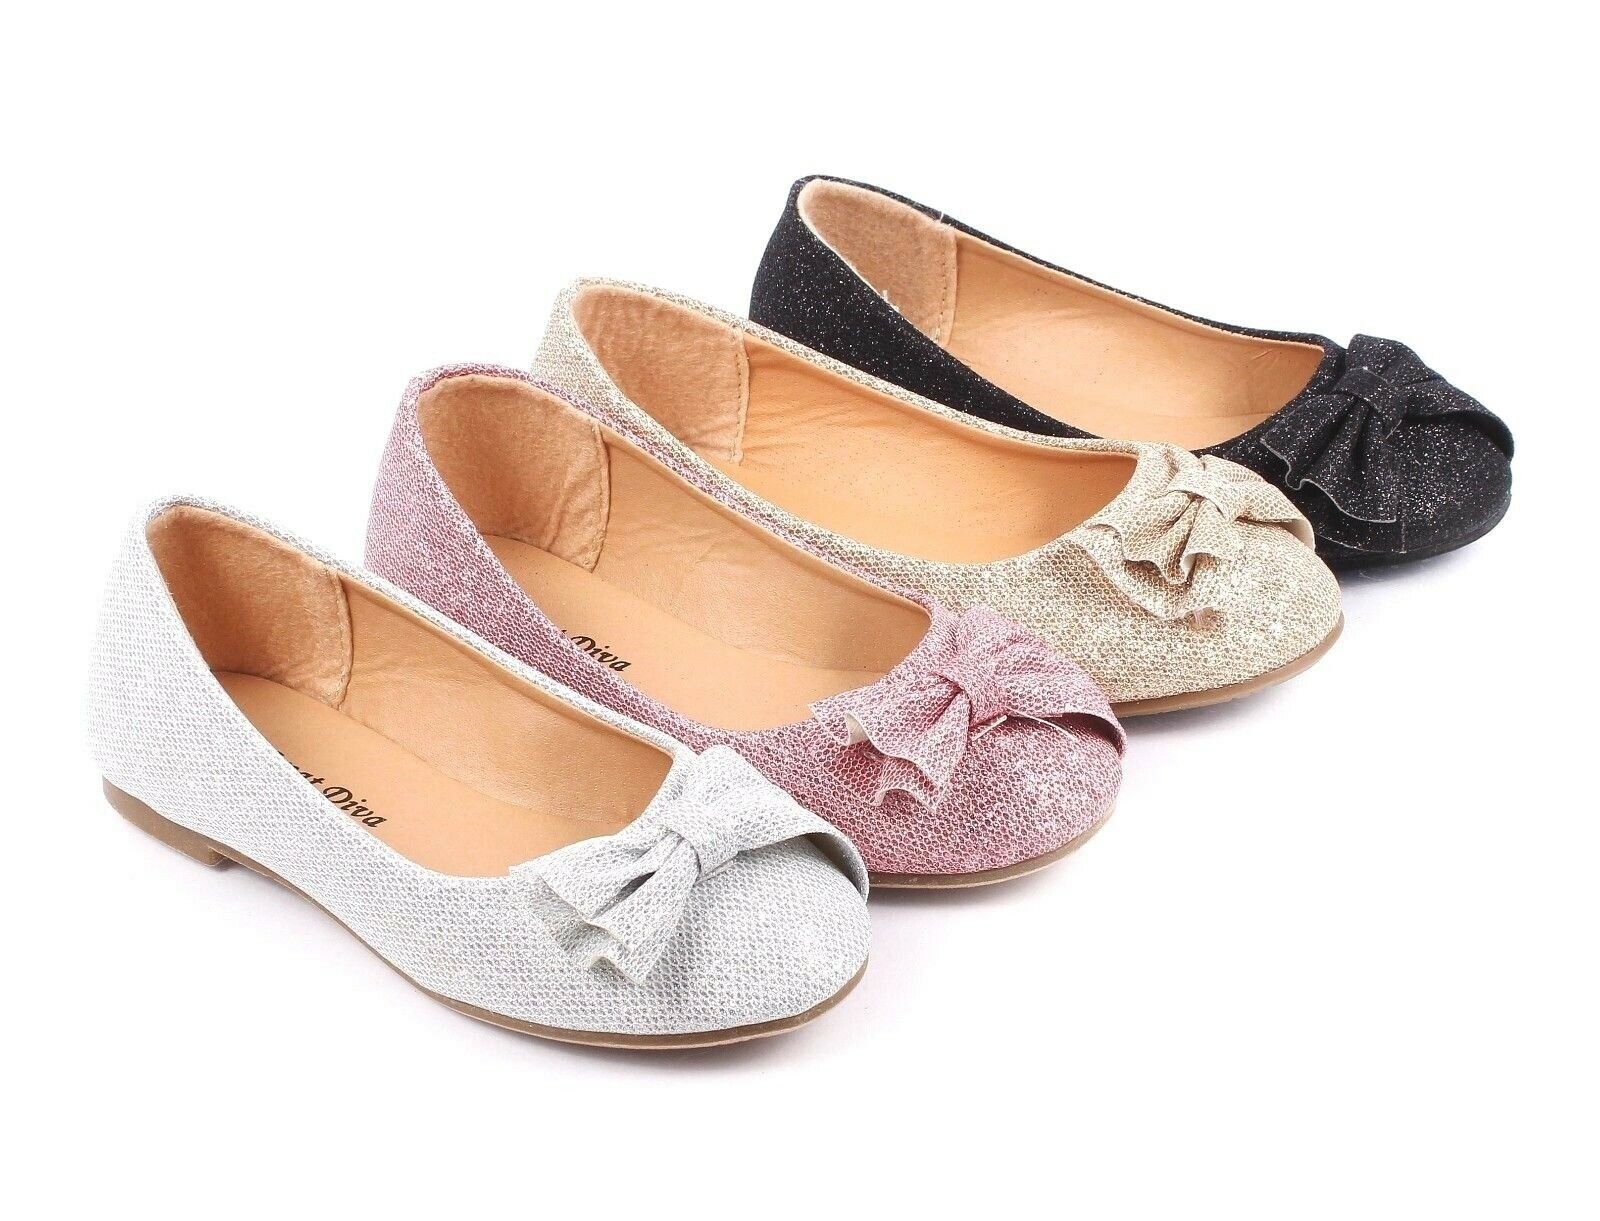 4 Color Cute Glitter Bowknot Kids/youth Sneakers Girls Flats Shoes Size 9 - 4